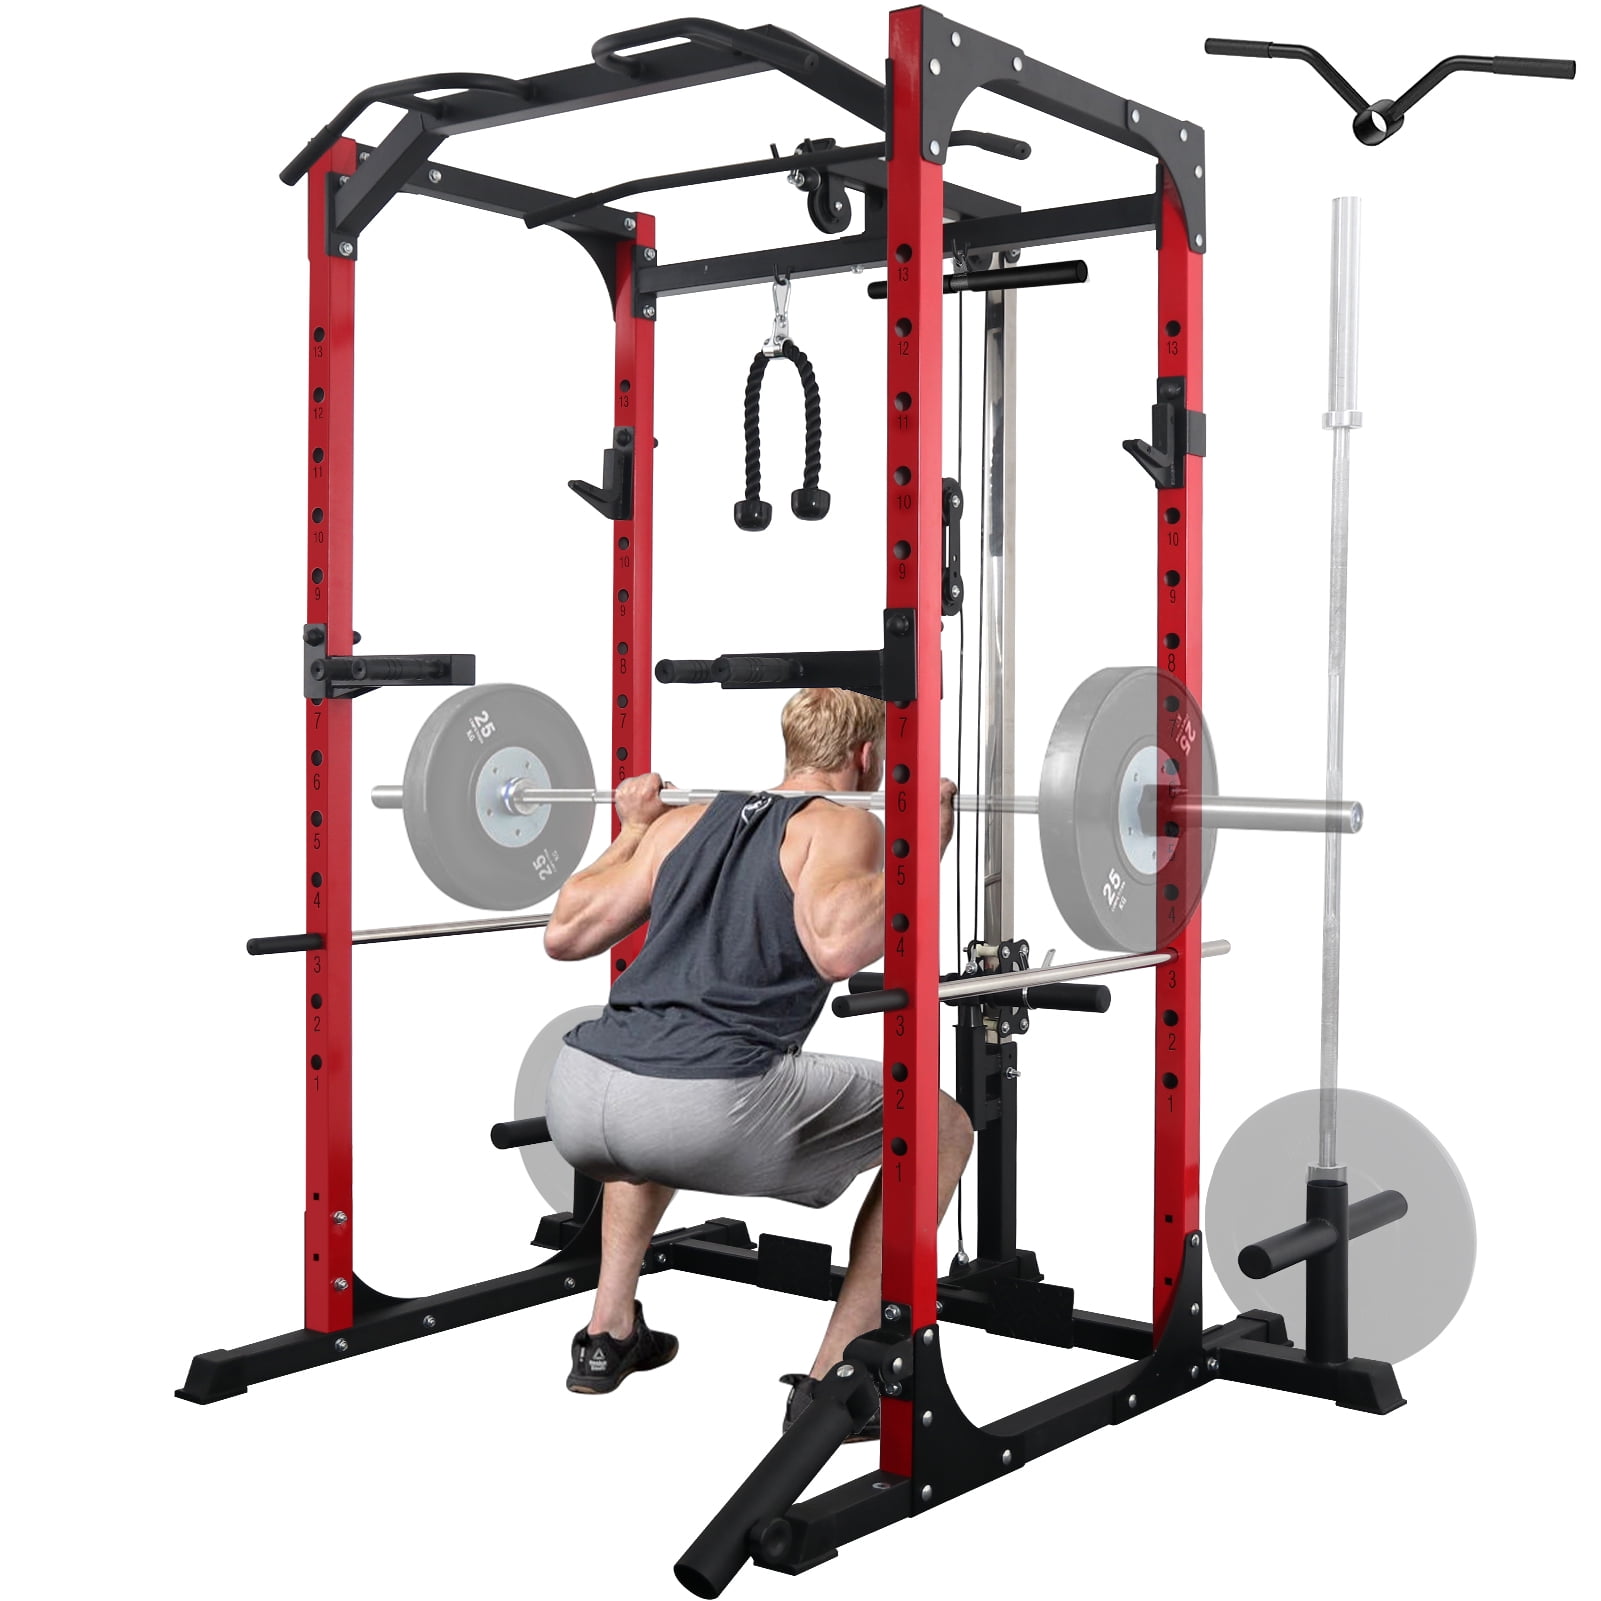 Details about   Heavy Duty Multi-Function Half FrameOlympic Fitness Power Cage Squat Rack NEW 